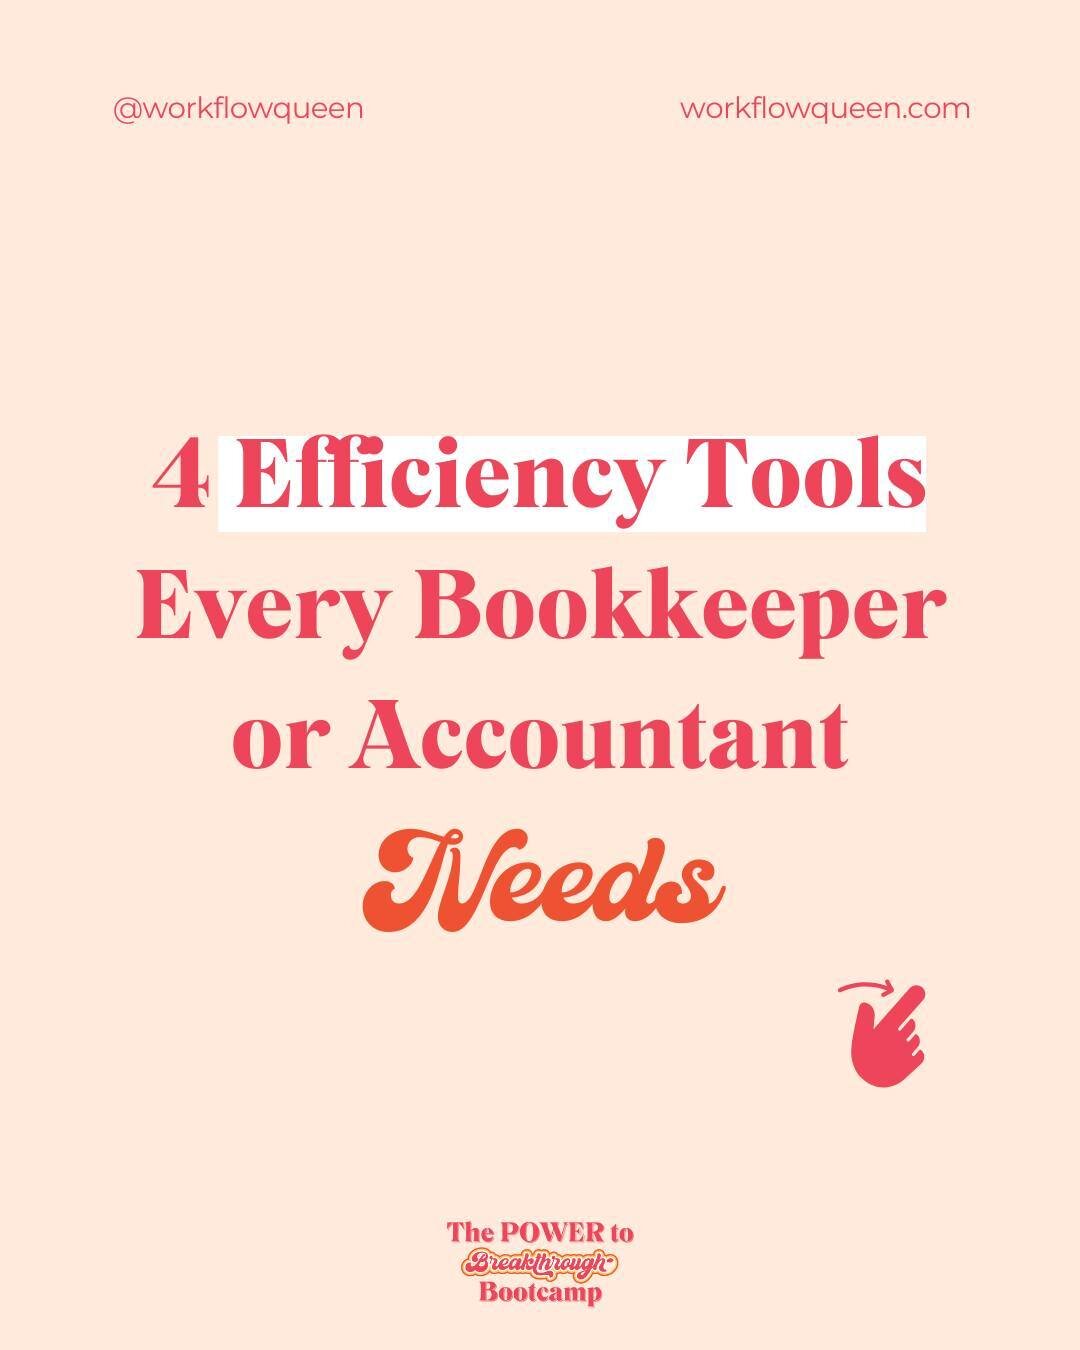 I couldn't live without number 4!! 🤩🔥

Want to maximize your efficiency and better serve your clients??

Join me for my 💥FREE upcoming workshop, The POWER to Breakthrough Bootcamp!💥
🗓️ March 4-8th

👉 Comment POWER below and I'll DM you the link